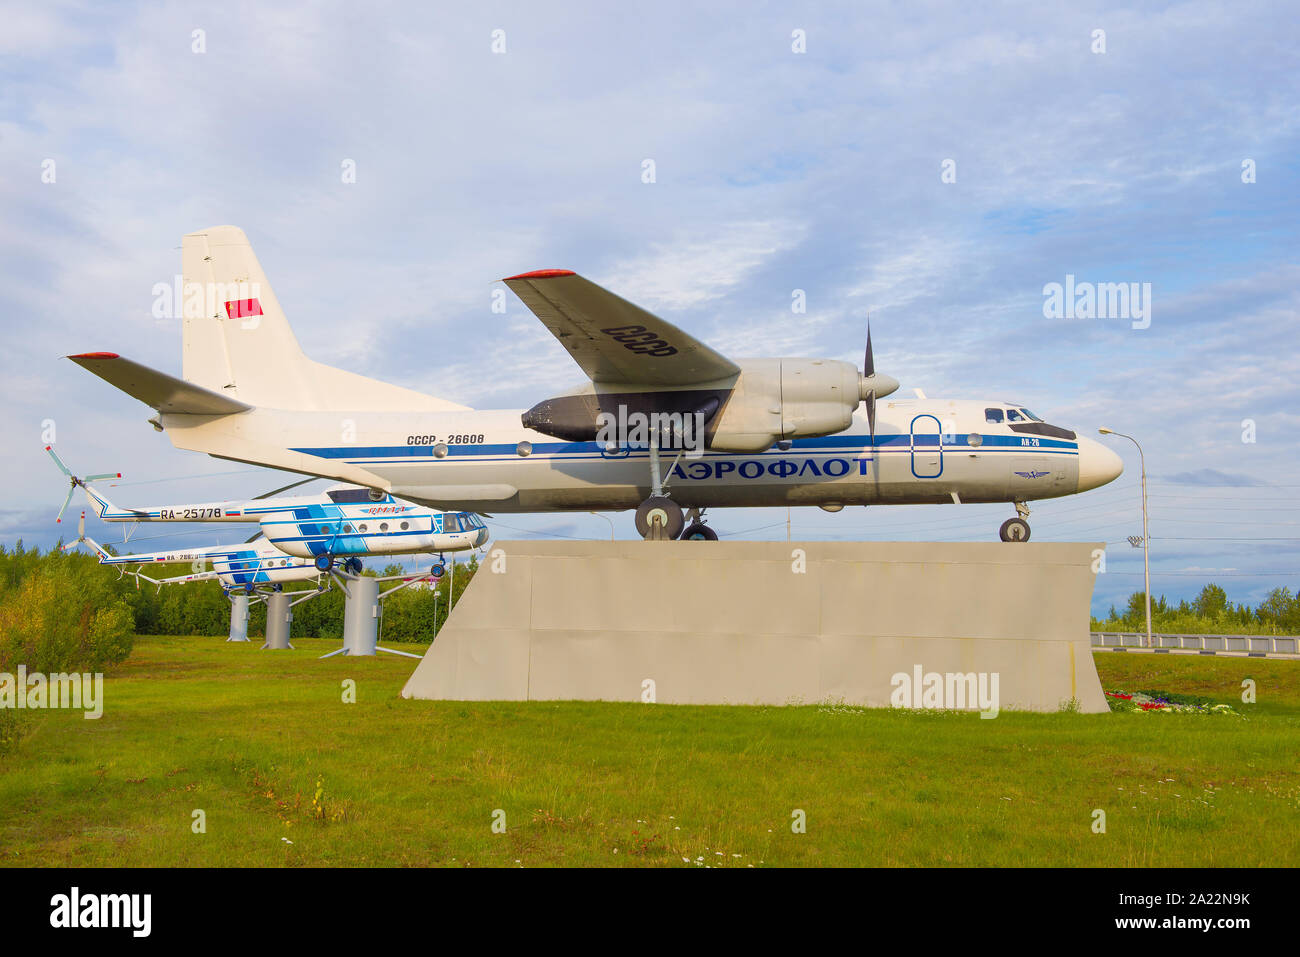 SALEHARD, RUSSIA - AUGUST 29, 2018: An-26 airplane in the commemorative exposition of civil aviation at the airport of Salekhard Stock Photo